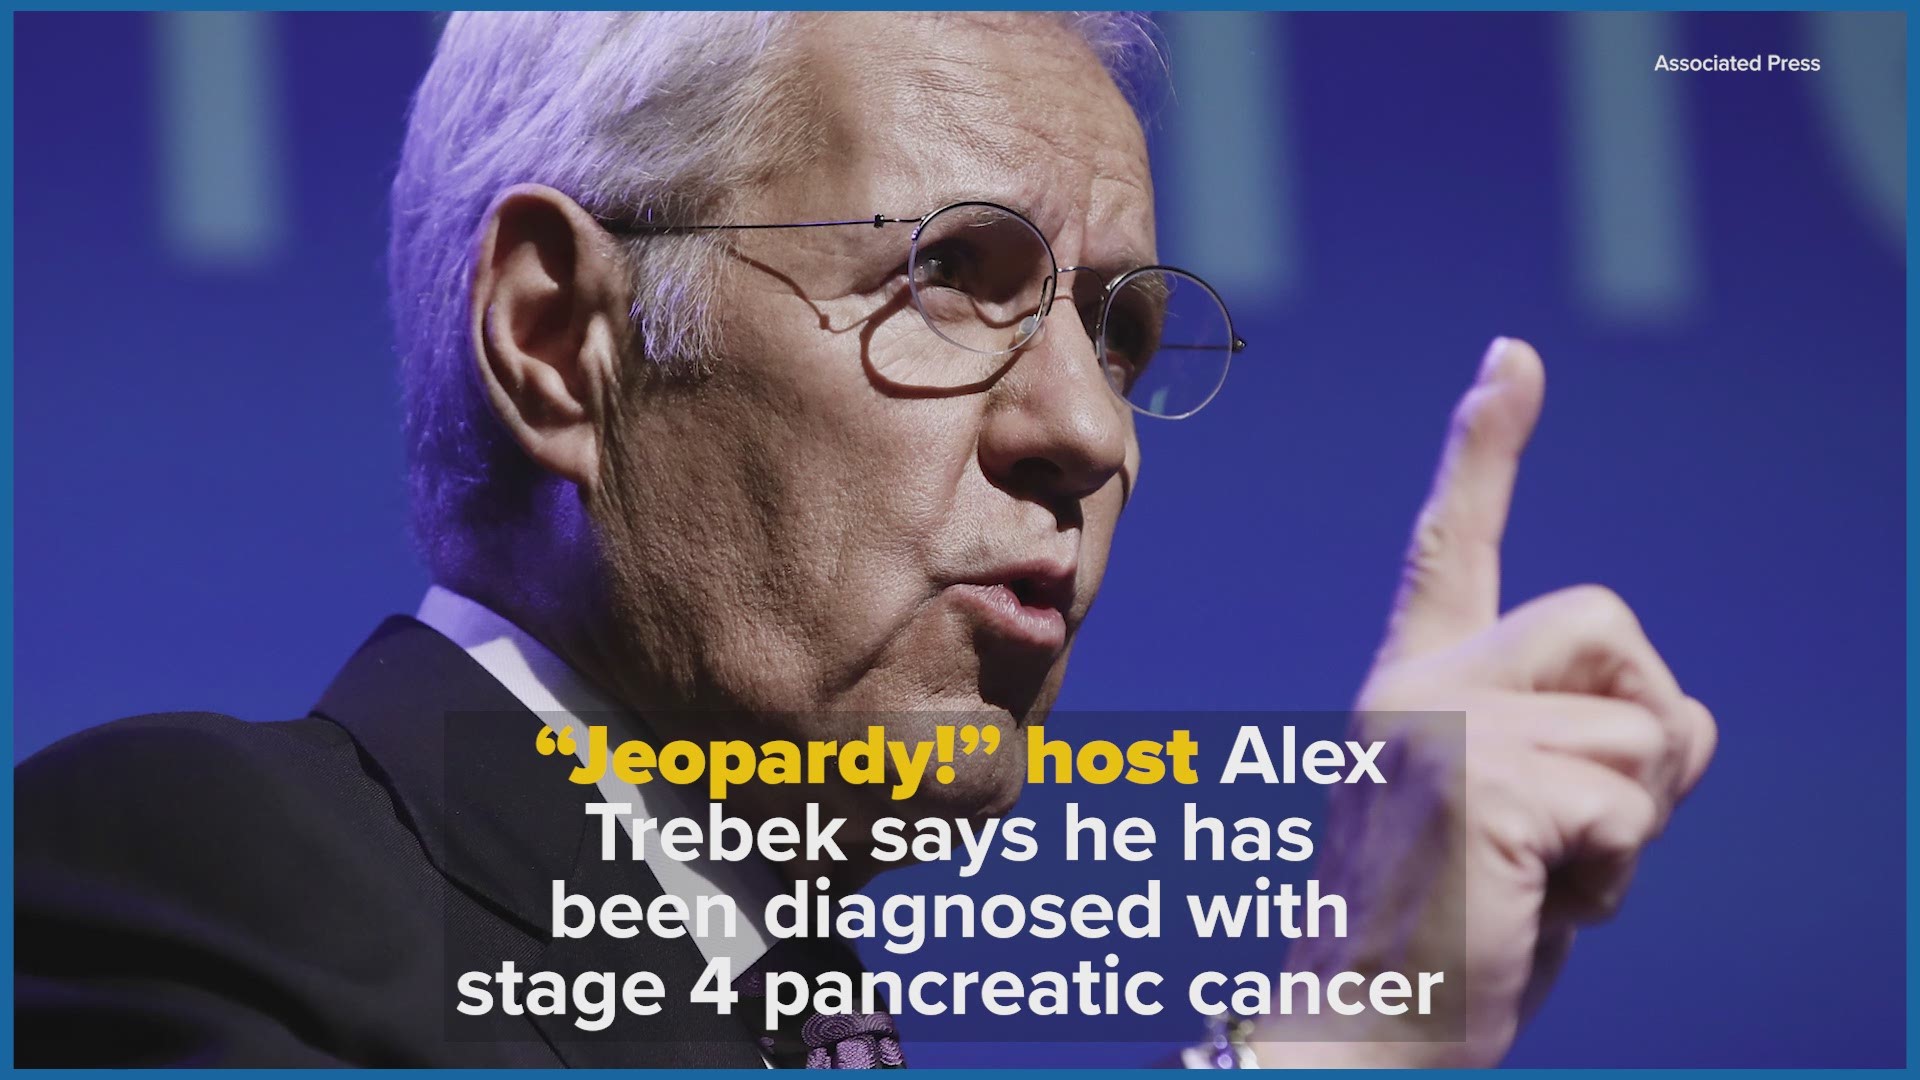 'Jeopardy!' host Alex Trebek says he, like 50,000 other people in the U.S. this year, has been diagnosed with stage 4 pancreatic cancer.